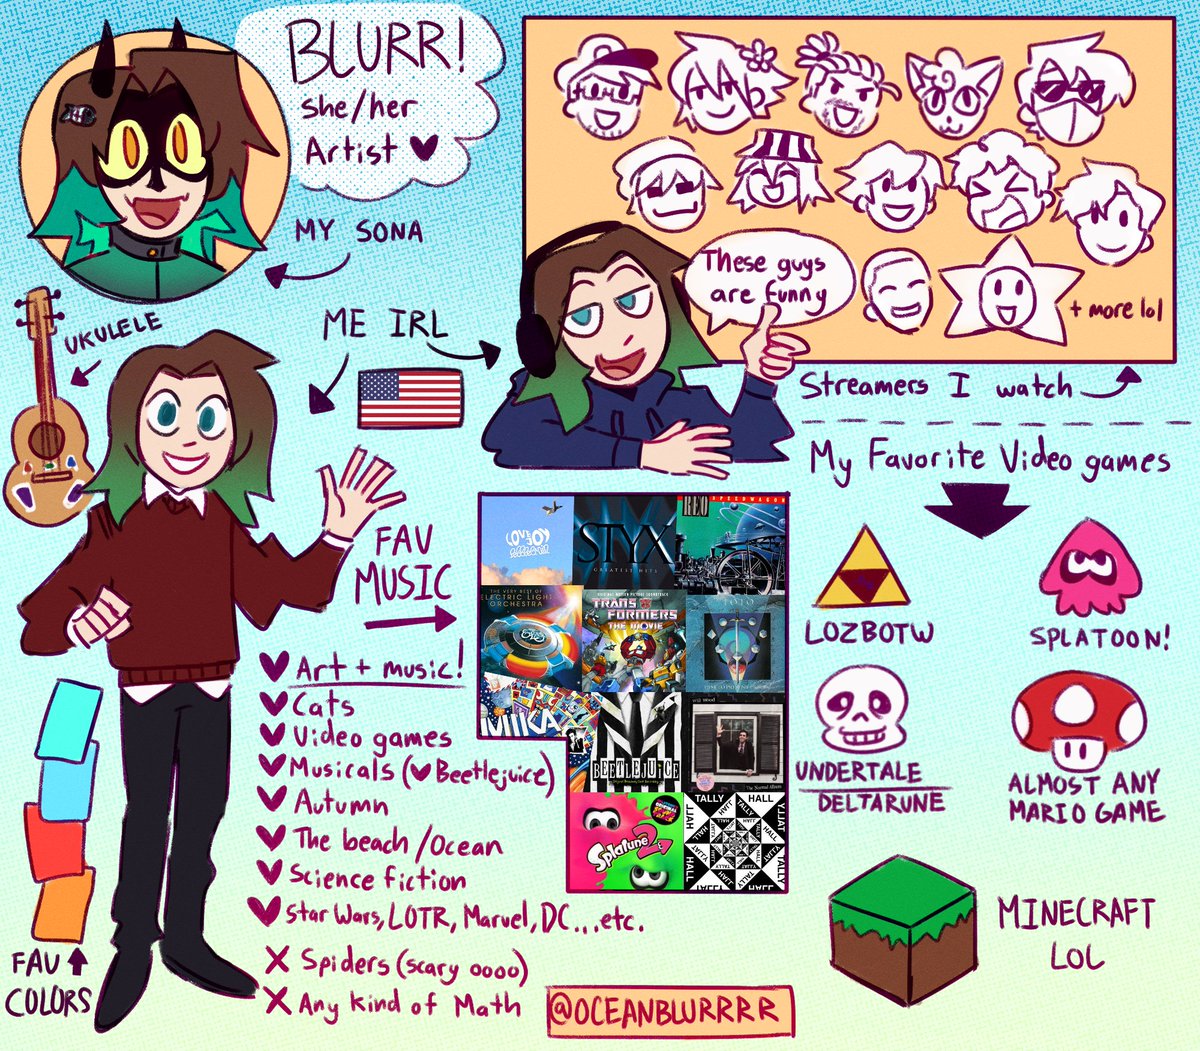 Meet the Artist! :D I drew just a little bit about me to celebrate 15k! tysm again! <3 